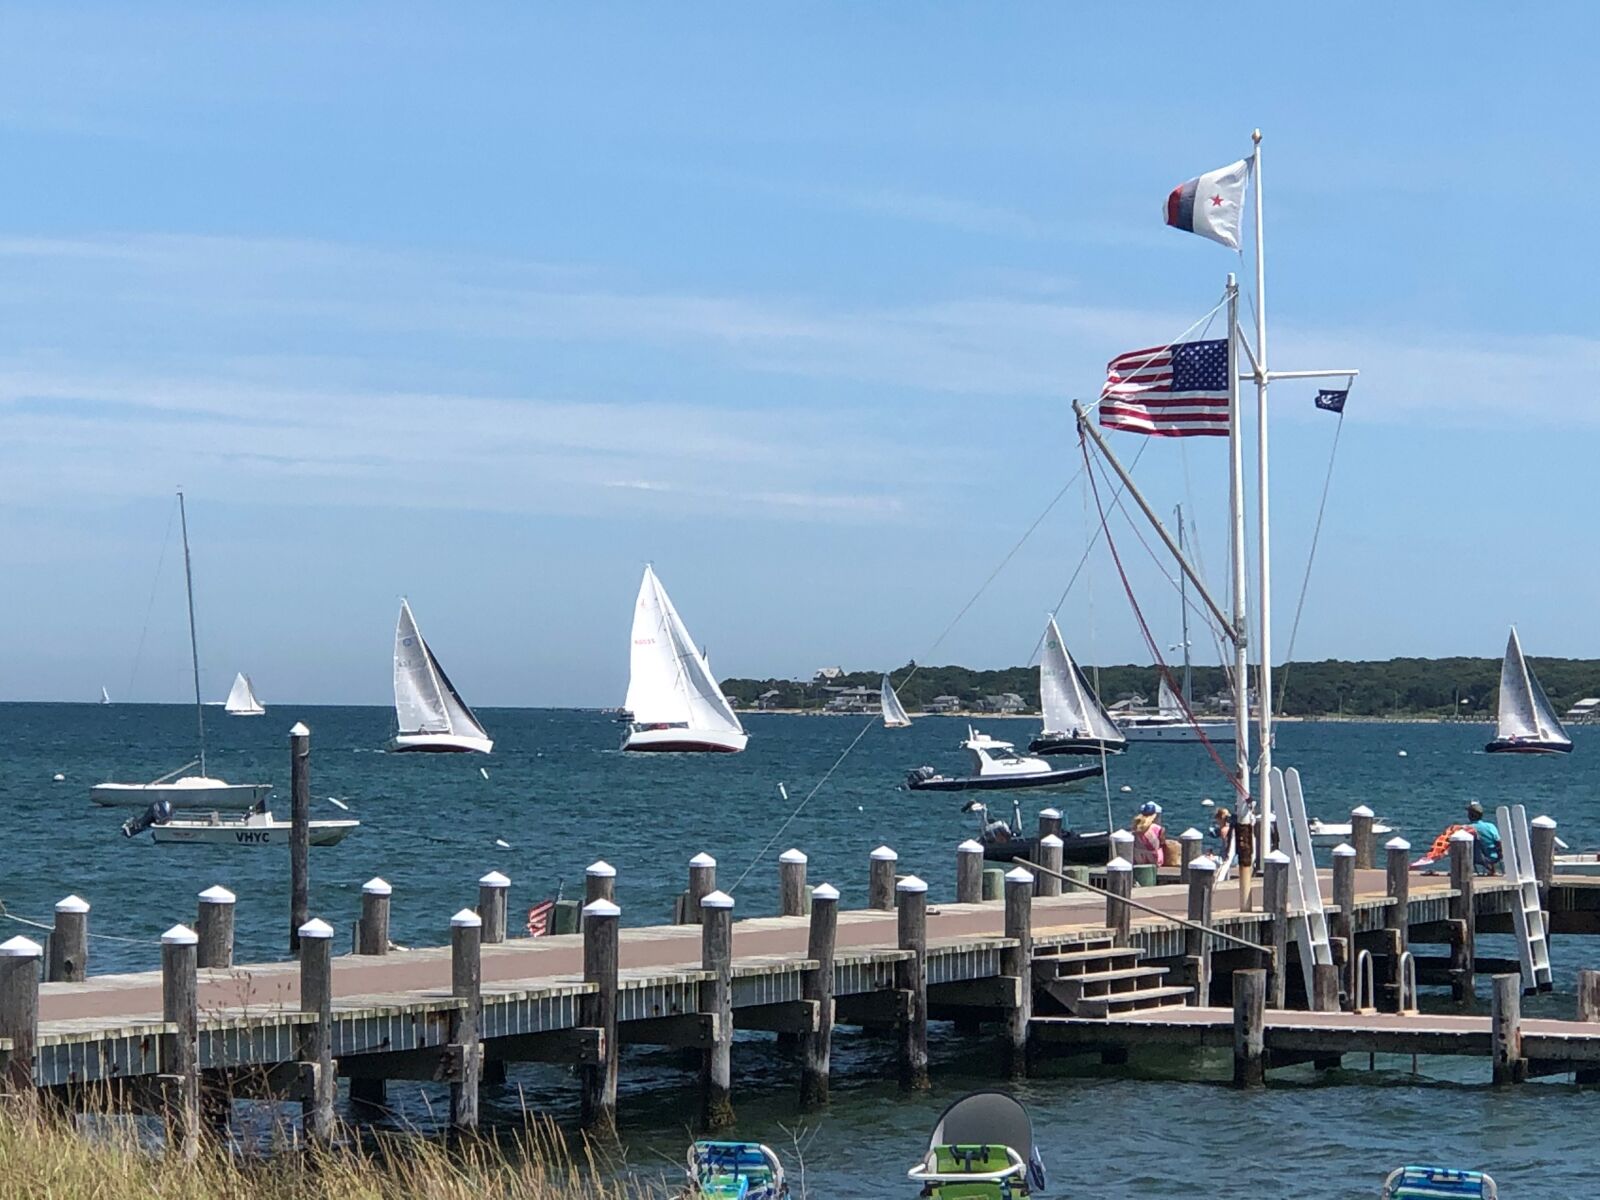 Apple iPhone 8 Plus + iPhone 8 Plus back dual camera 6.6mm f/2.8 sample photo. Sailboat, dock, flags photography